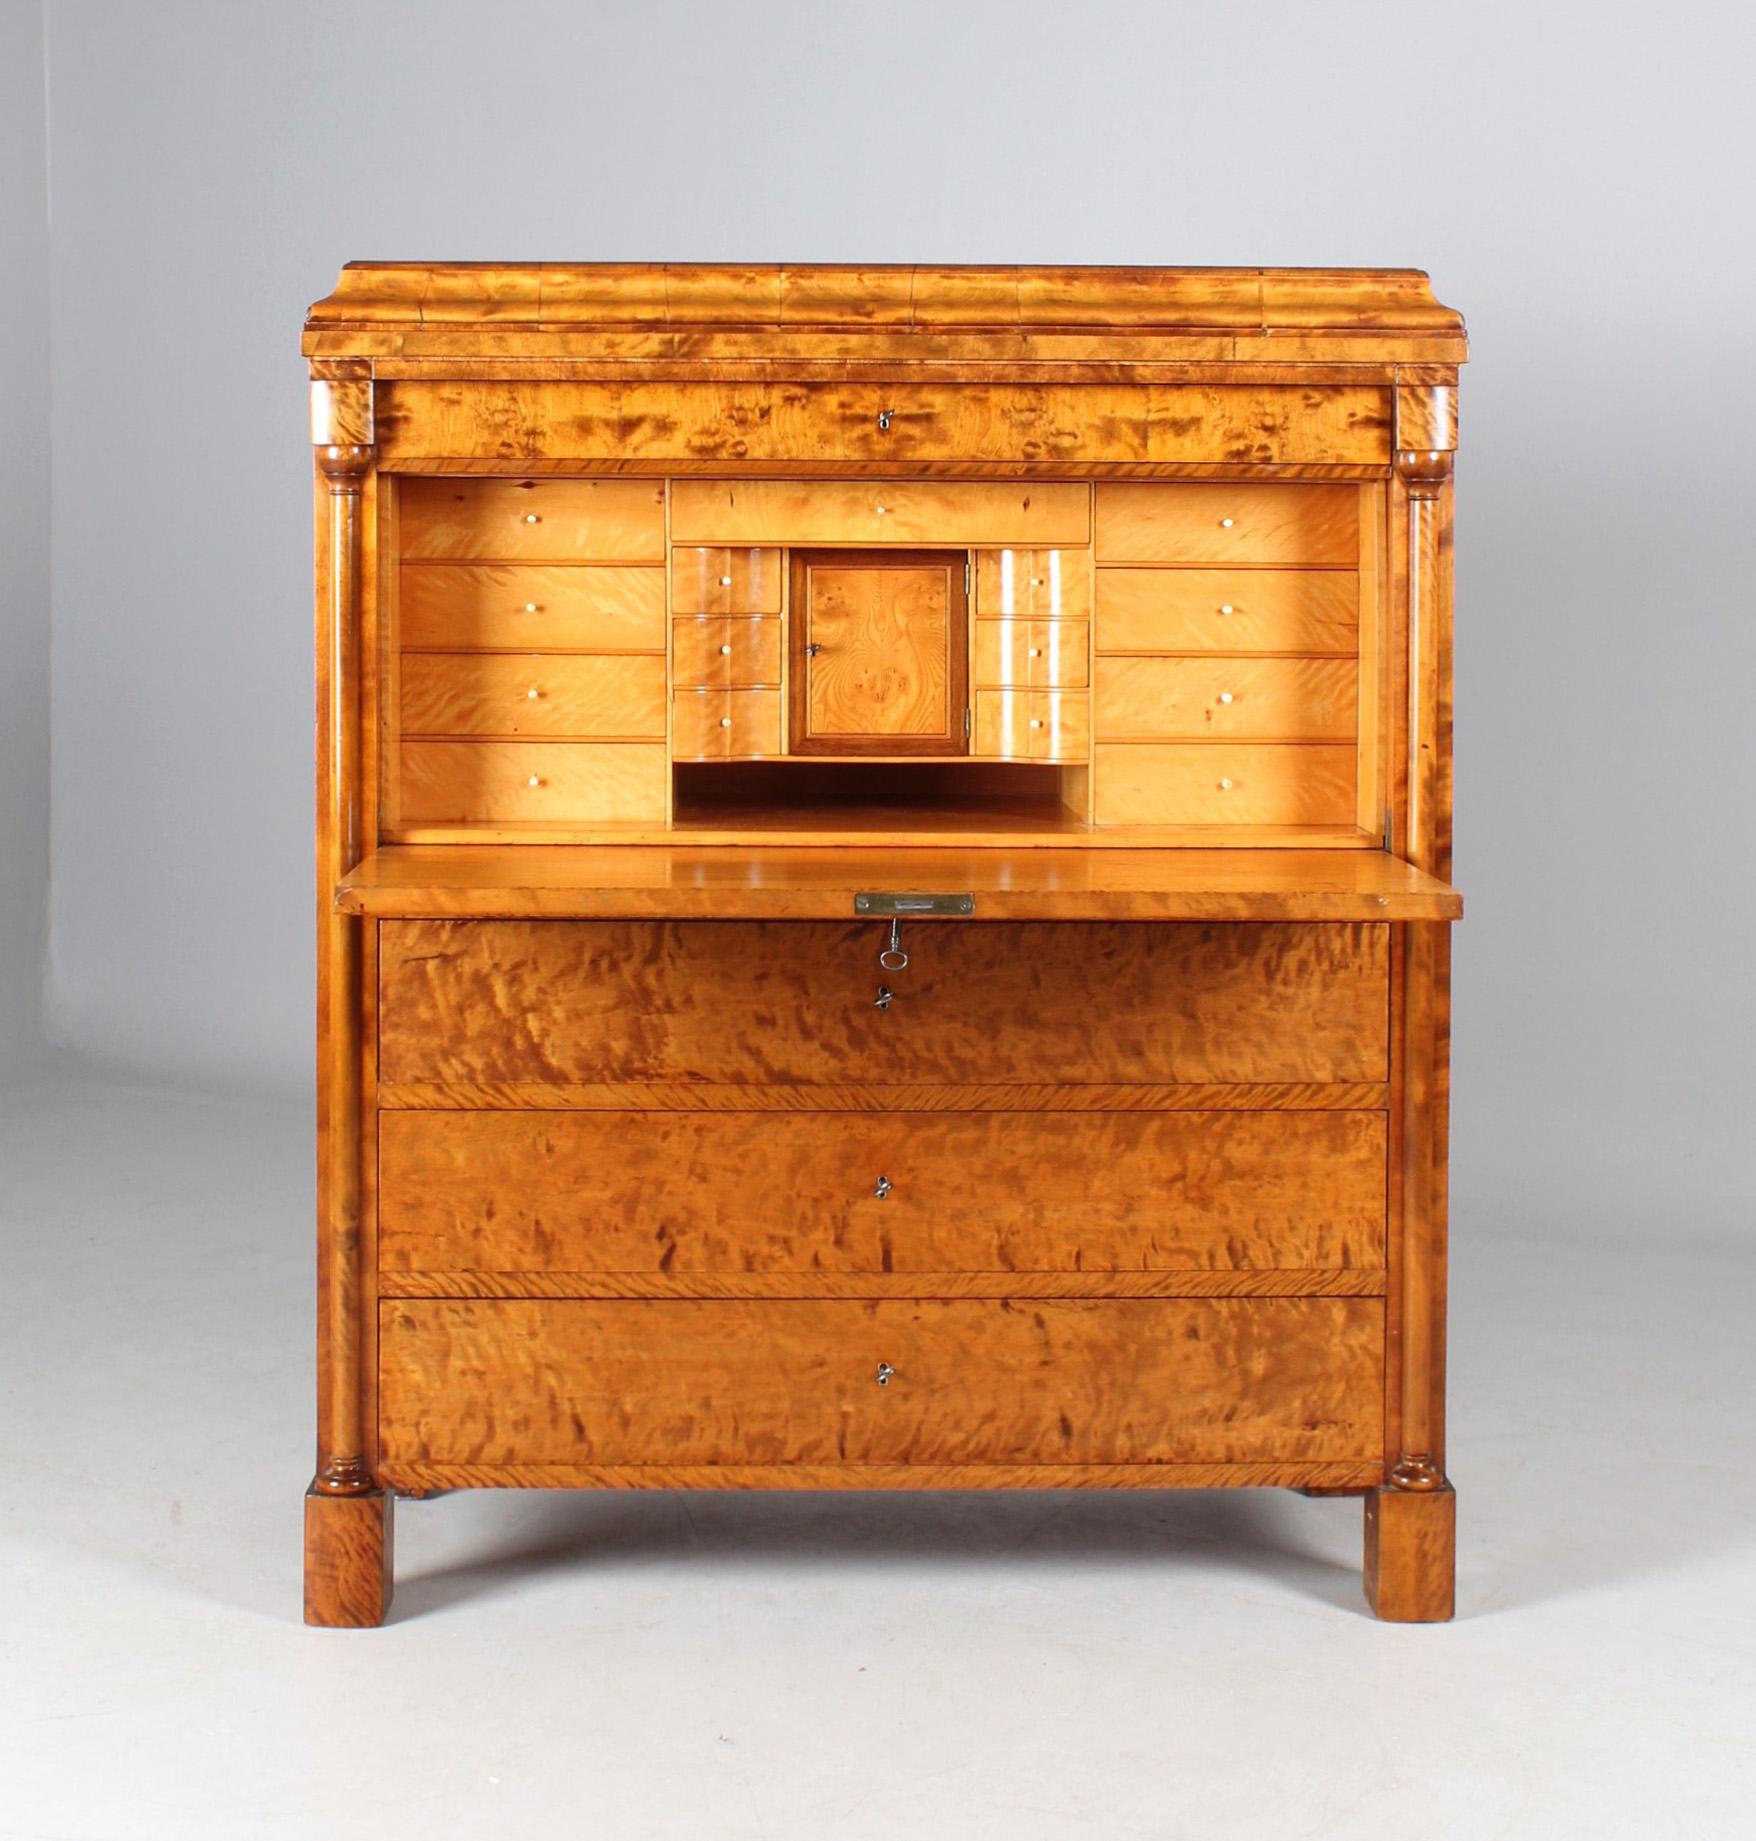 Antique secretary with secret compartment

Swedish
birch
second half 19th century

Dimensions: H x W x D: 135 x 112 x 52 cm

Description
Piece of furniture standing on block feet with three drawers at the bottom, a writing flap above and